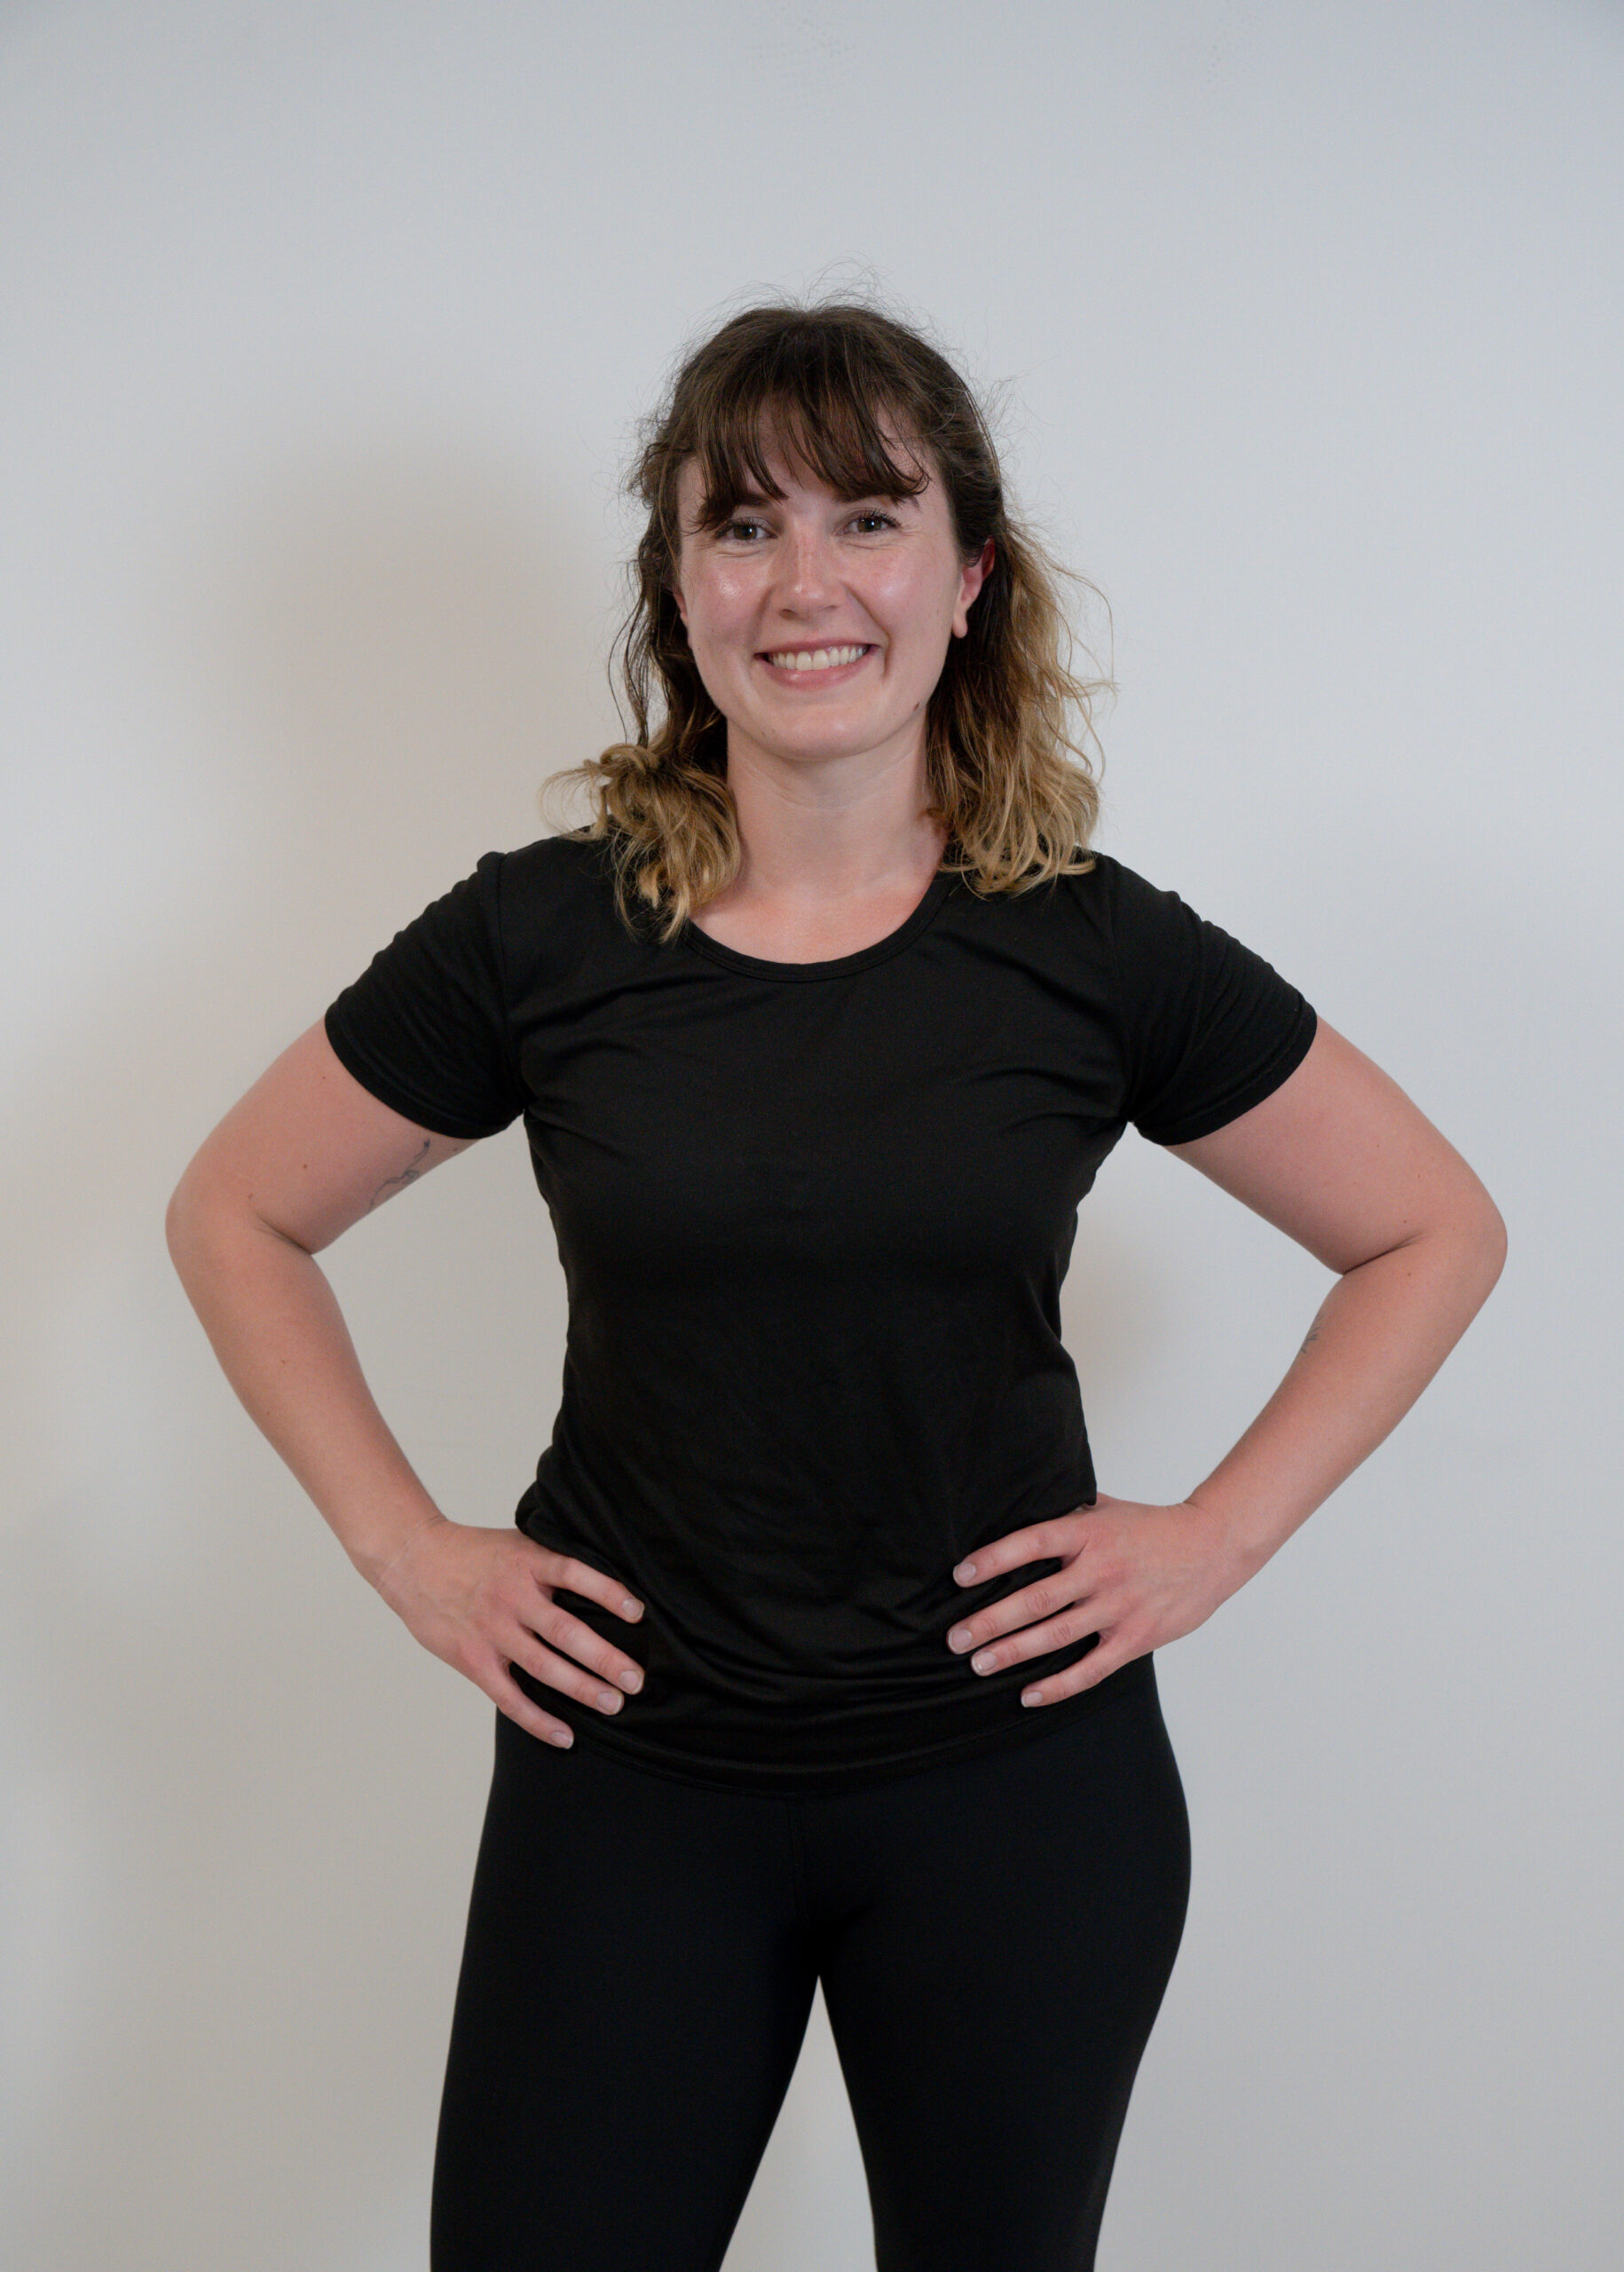 A woman wearing black leggings and a black t-shirt representing a team with strong SEO keywords.